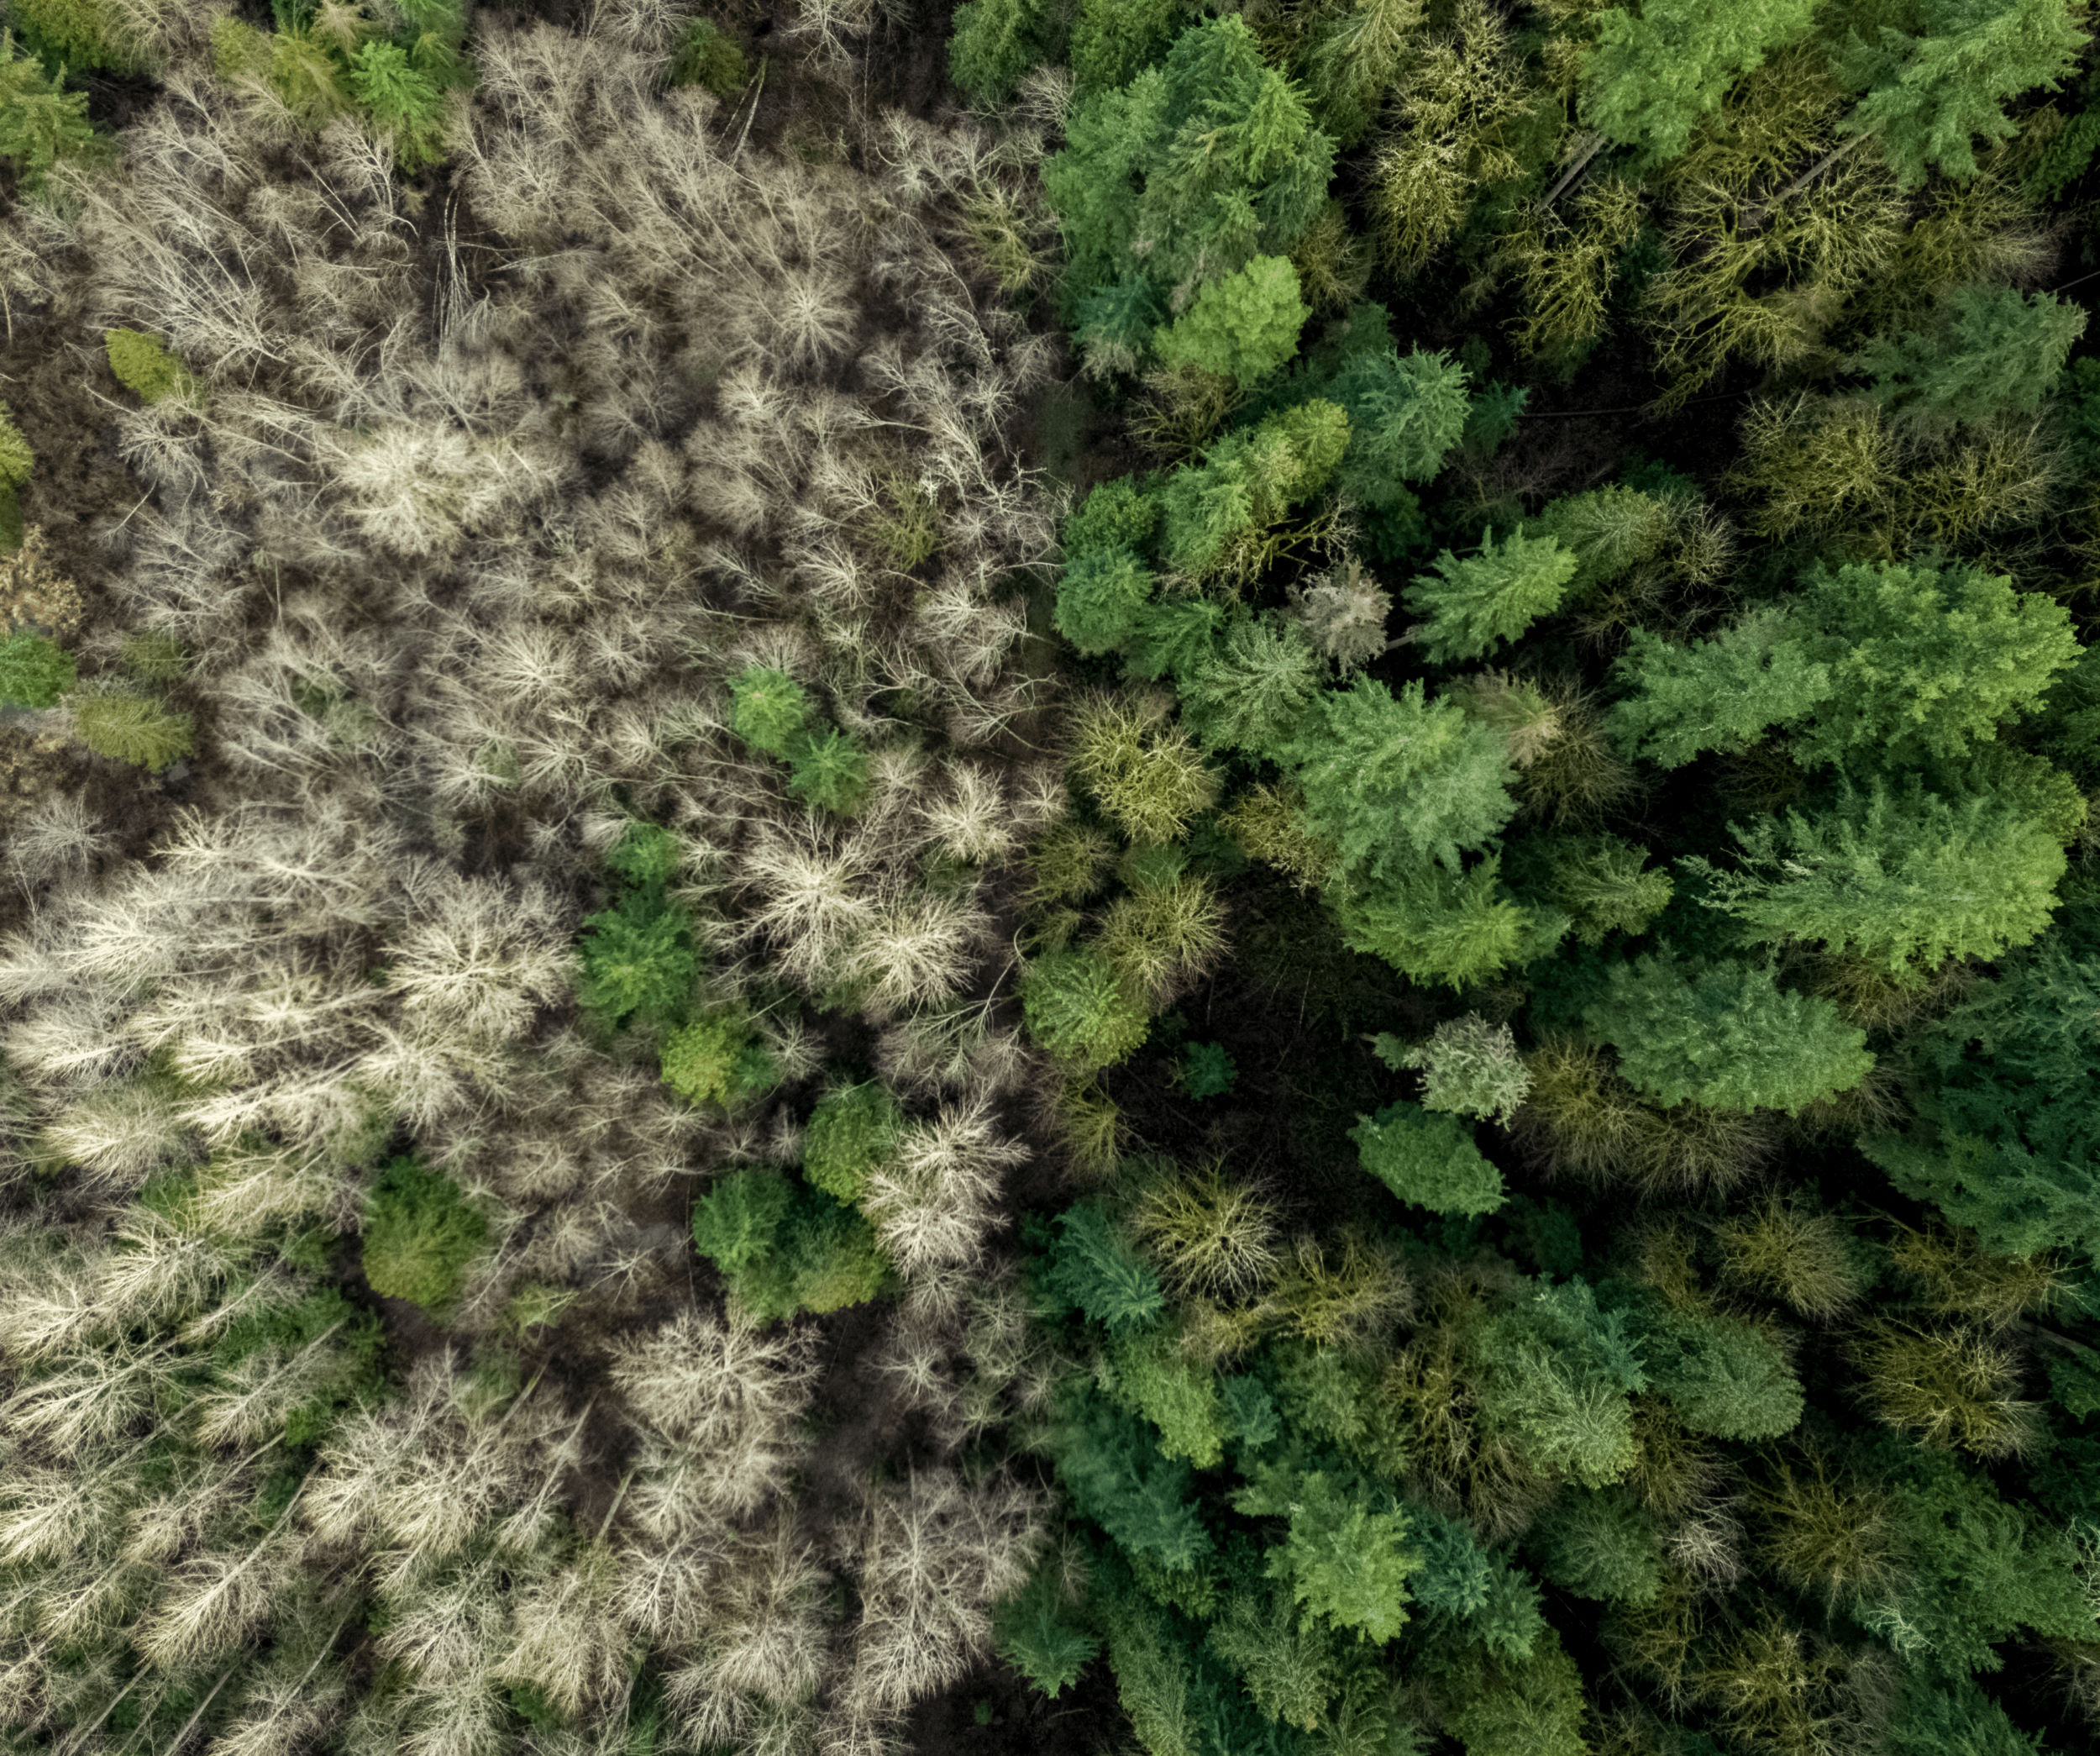 drone photo looking down at a forest where half the photo is live, green conifers and the other half mostly pale bare branches